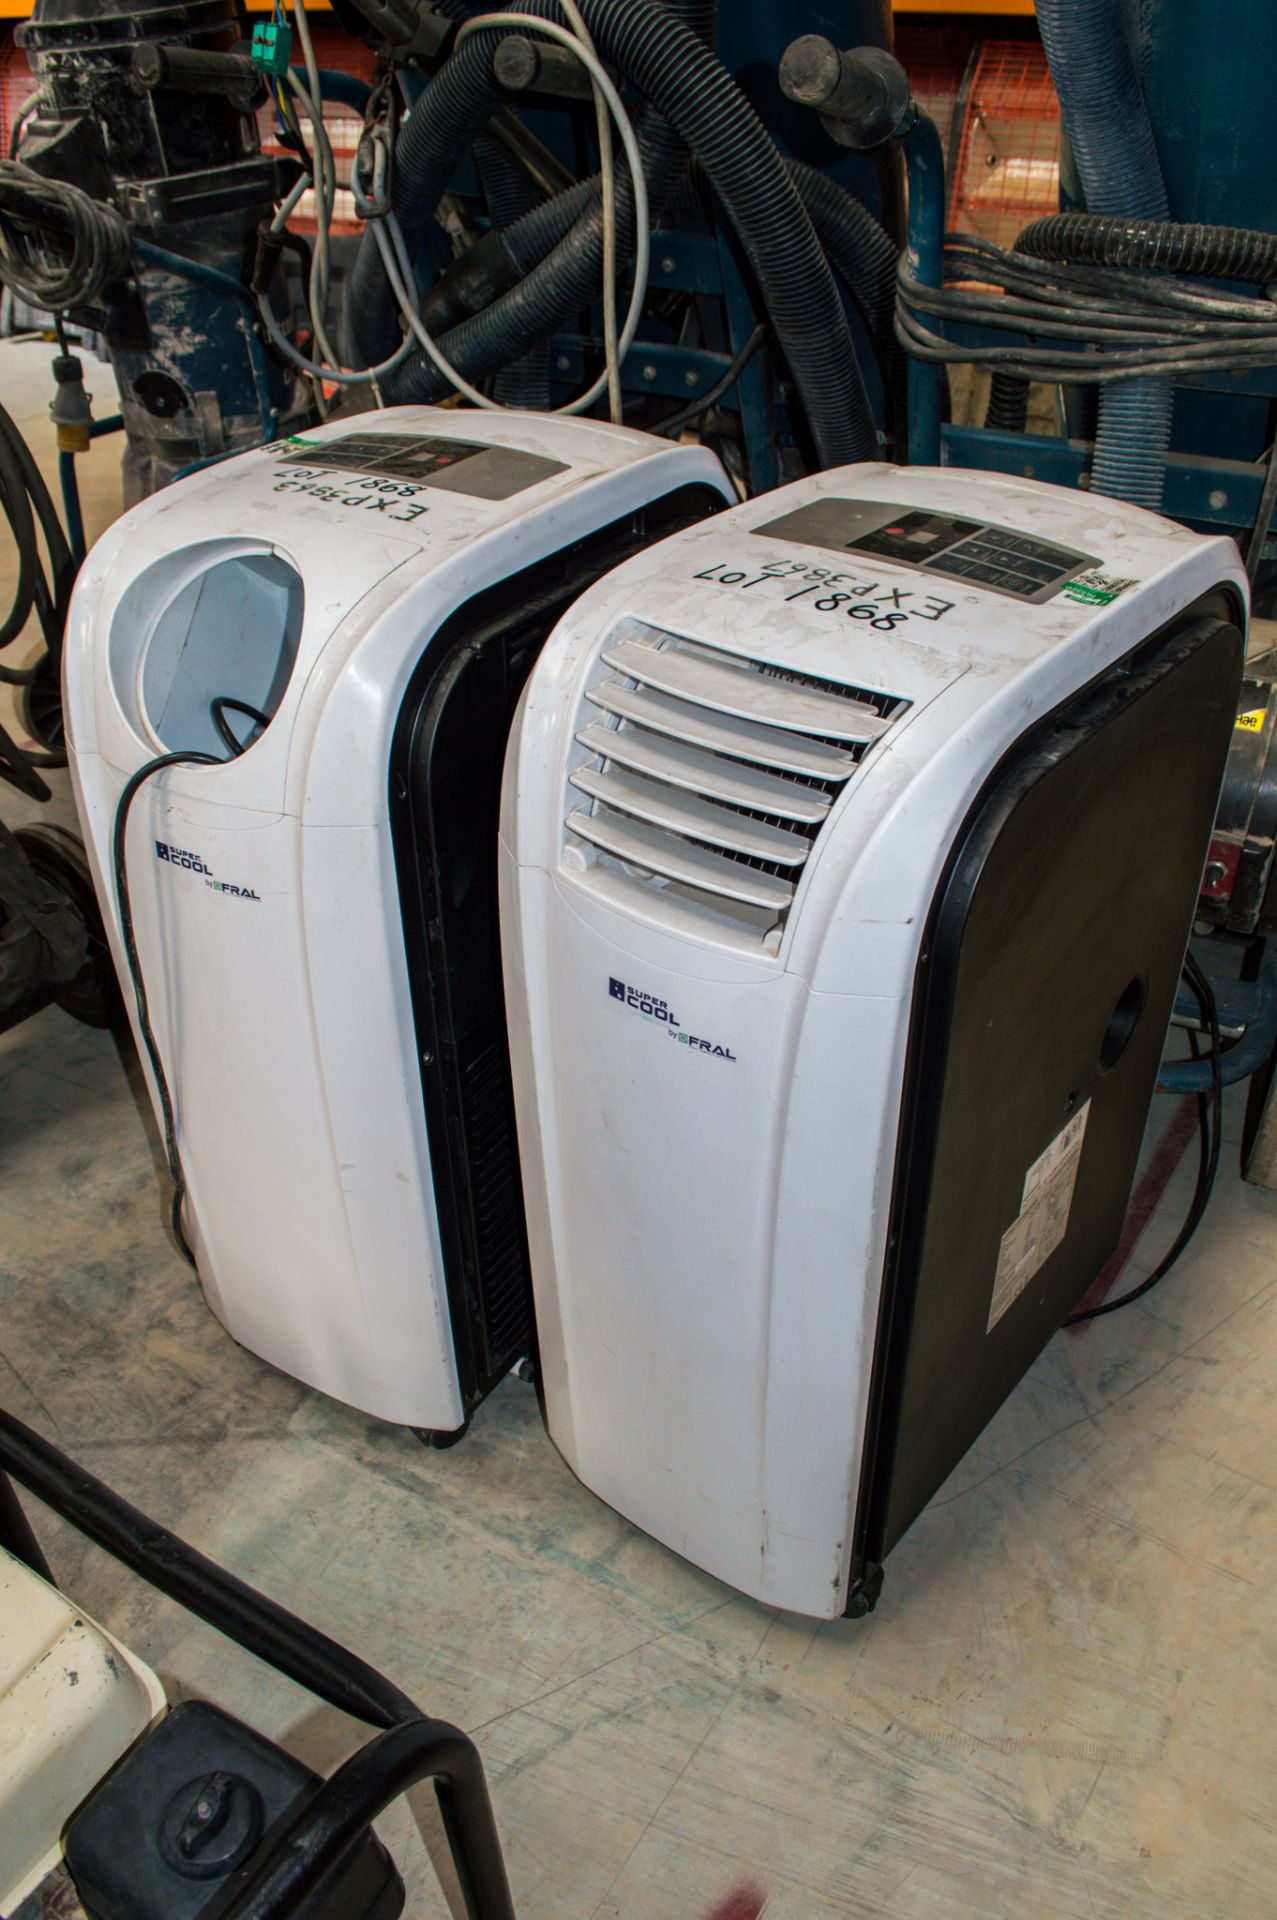 2 - Fral Super Cool air conditioning units EXP3863, EXP3867